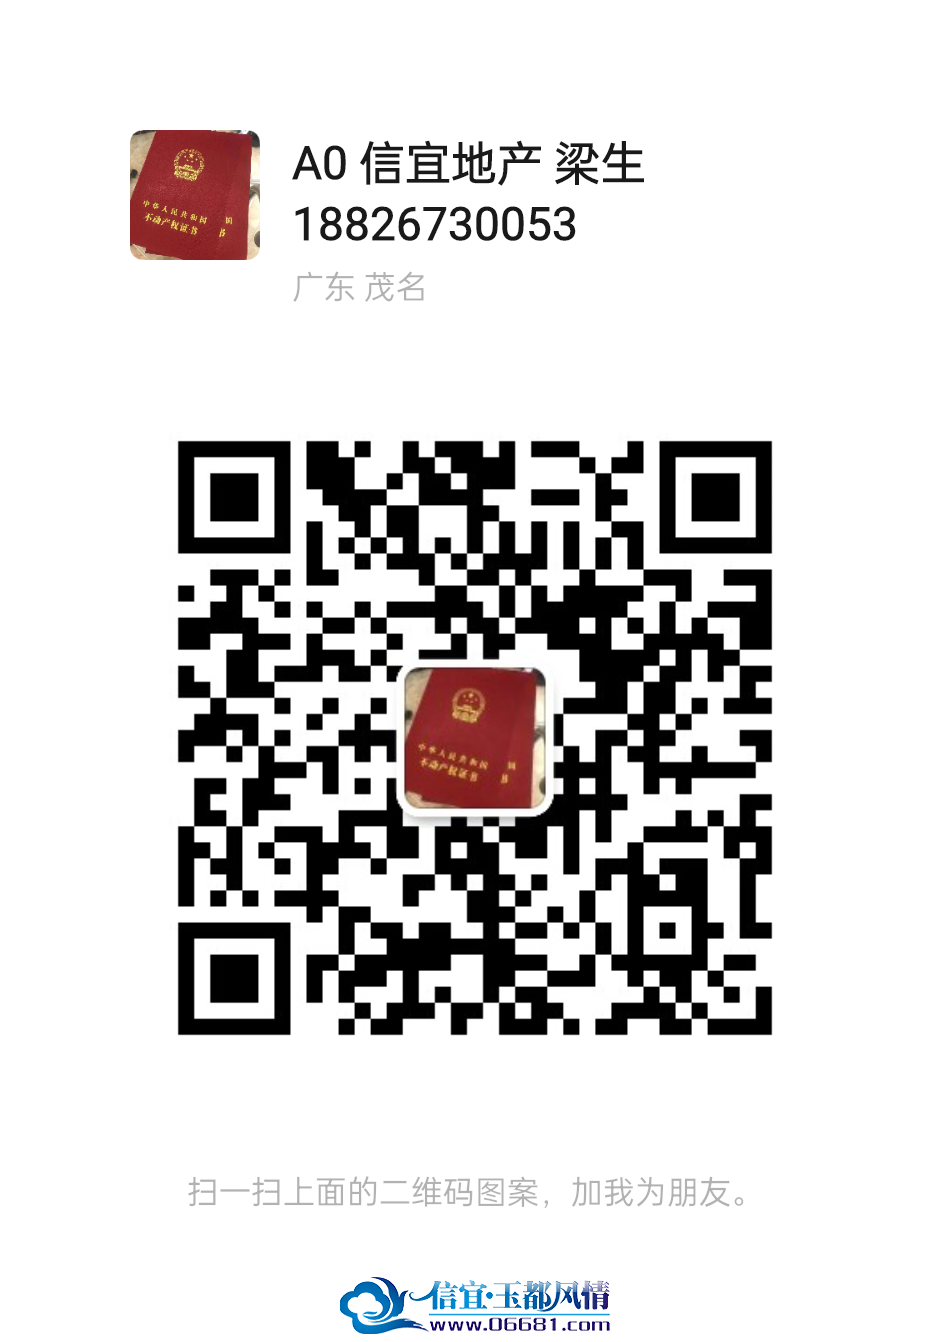 mmqrcode1702038352111.png